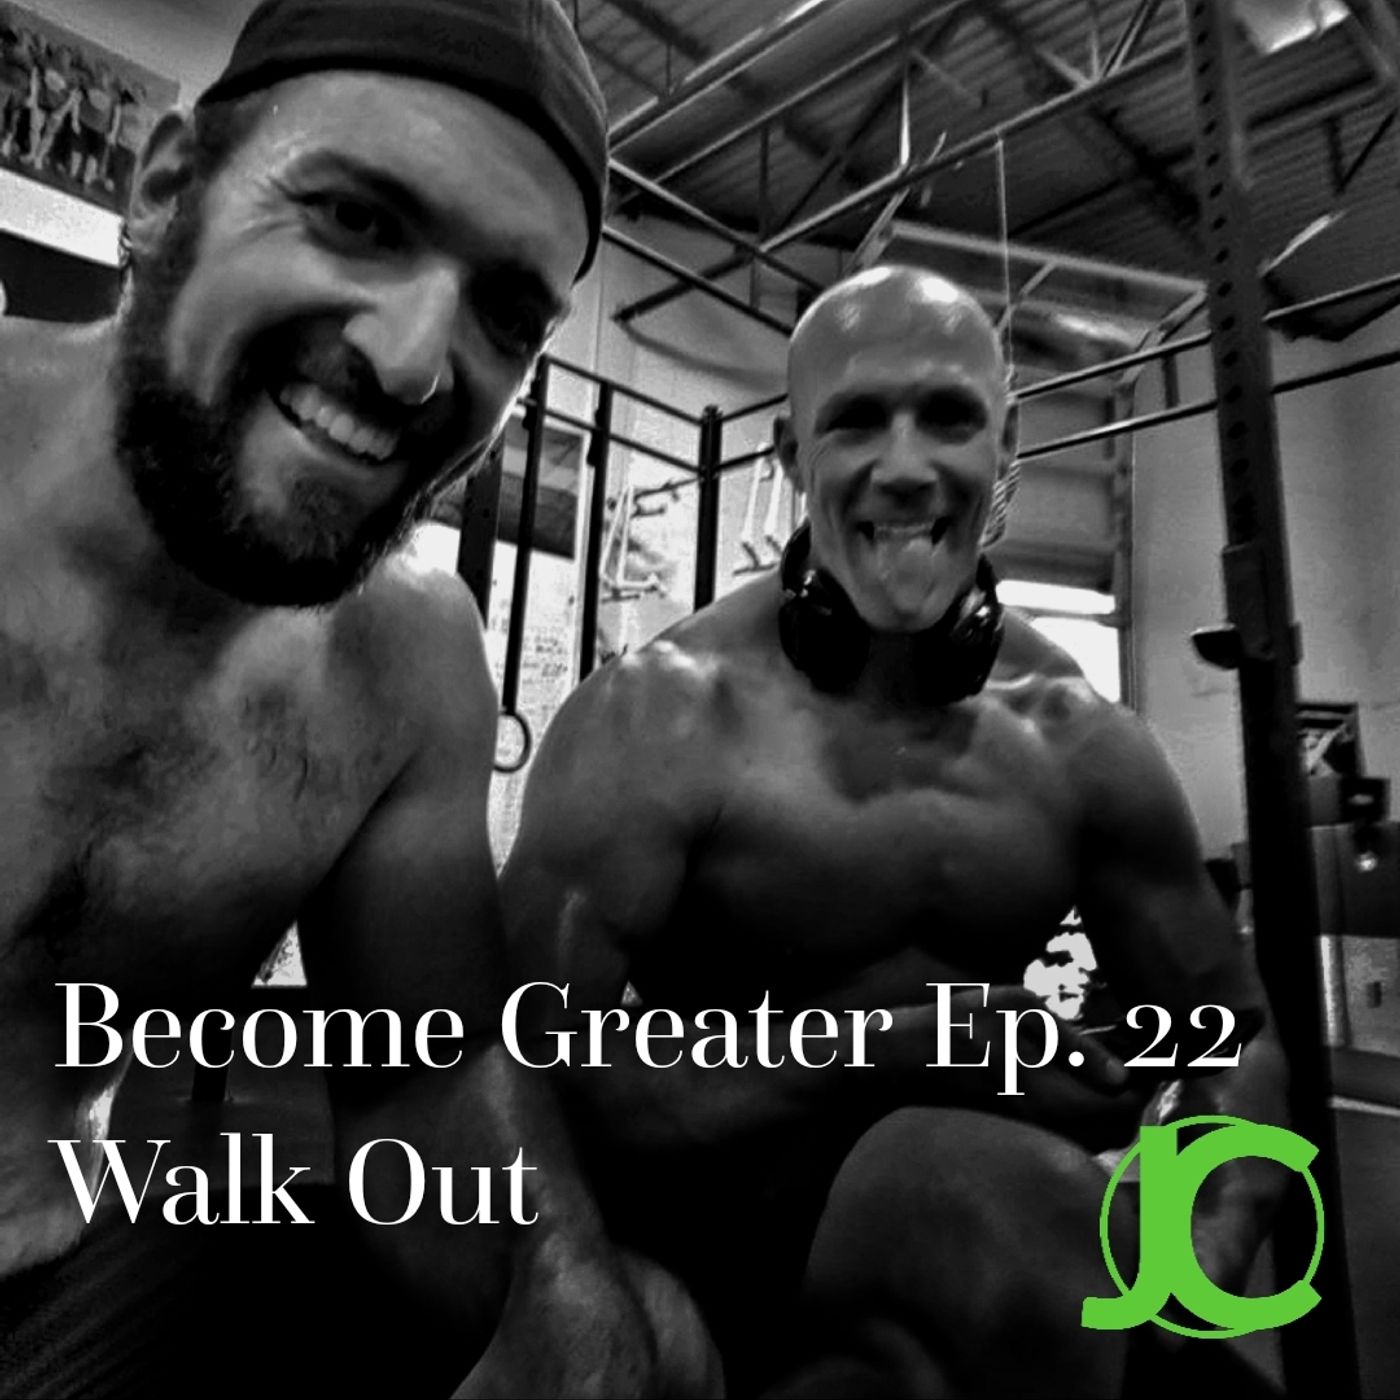 Become Greater Ep. 22 - Walk Out